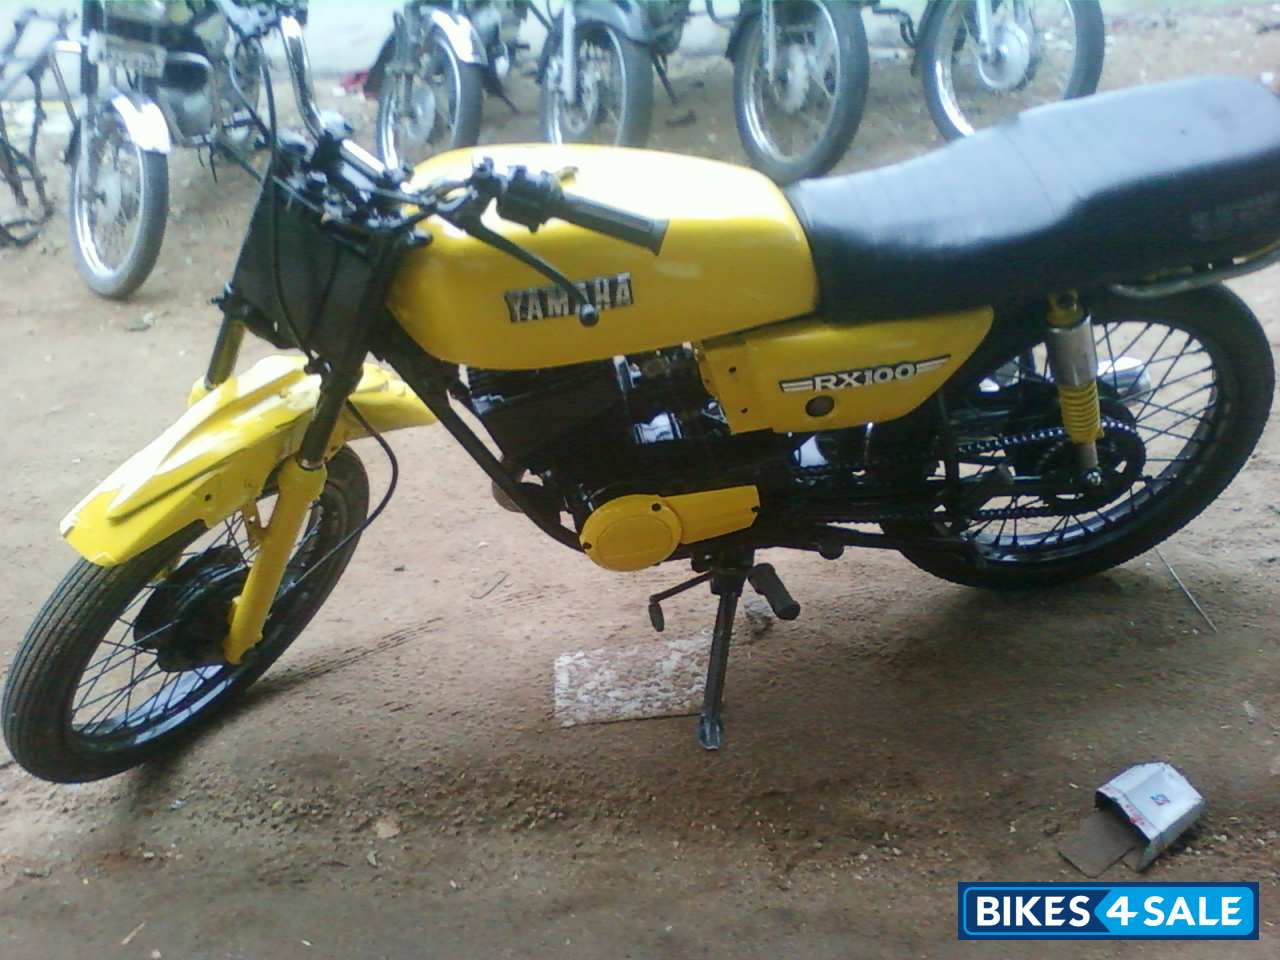 Used 1991 Model Yamaha Rx 100 For Sale In Hyderabad Id Yellow Colour Bikes4sale